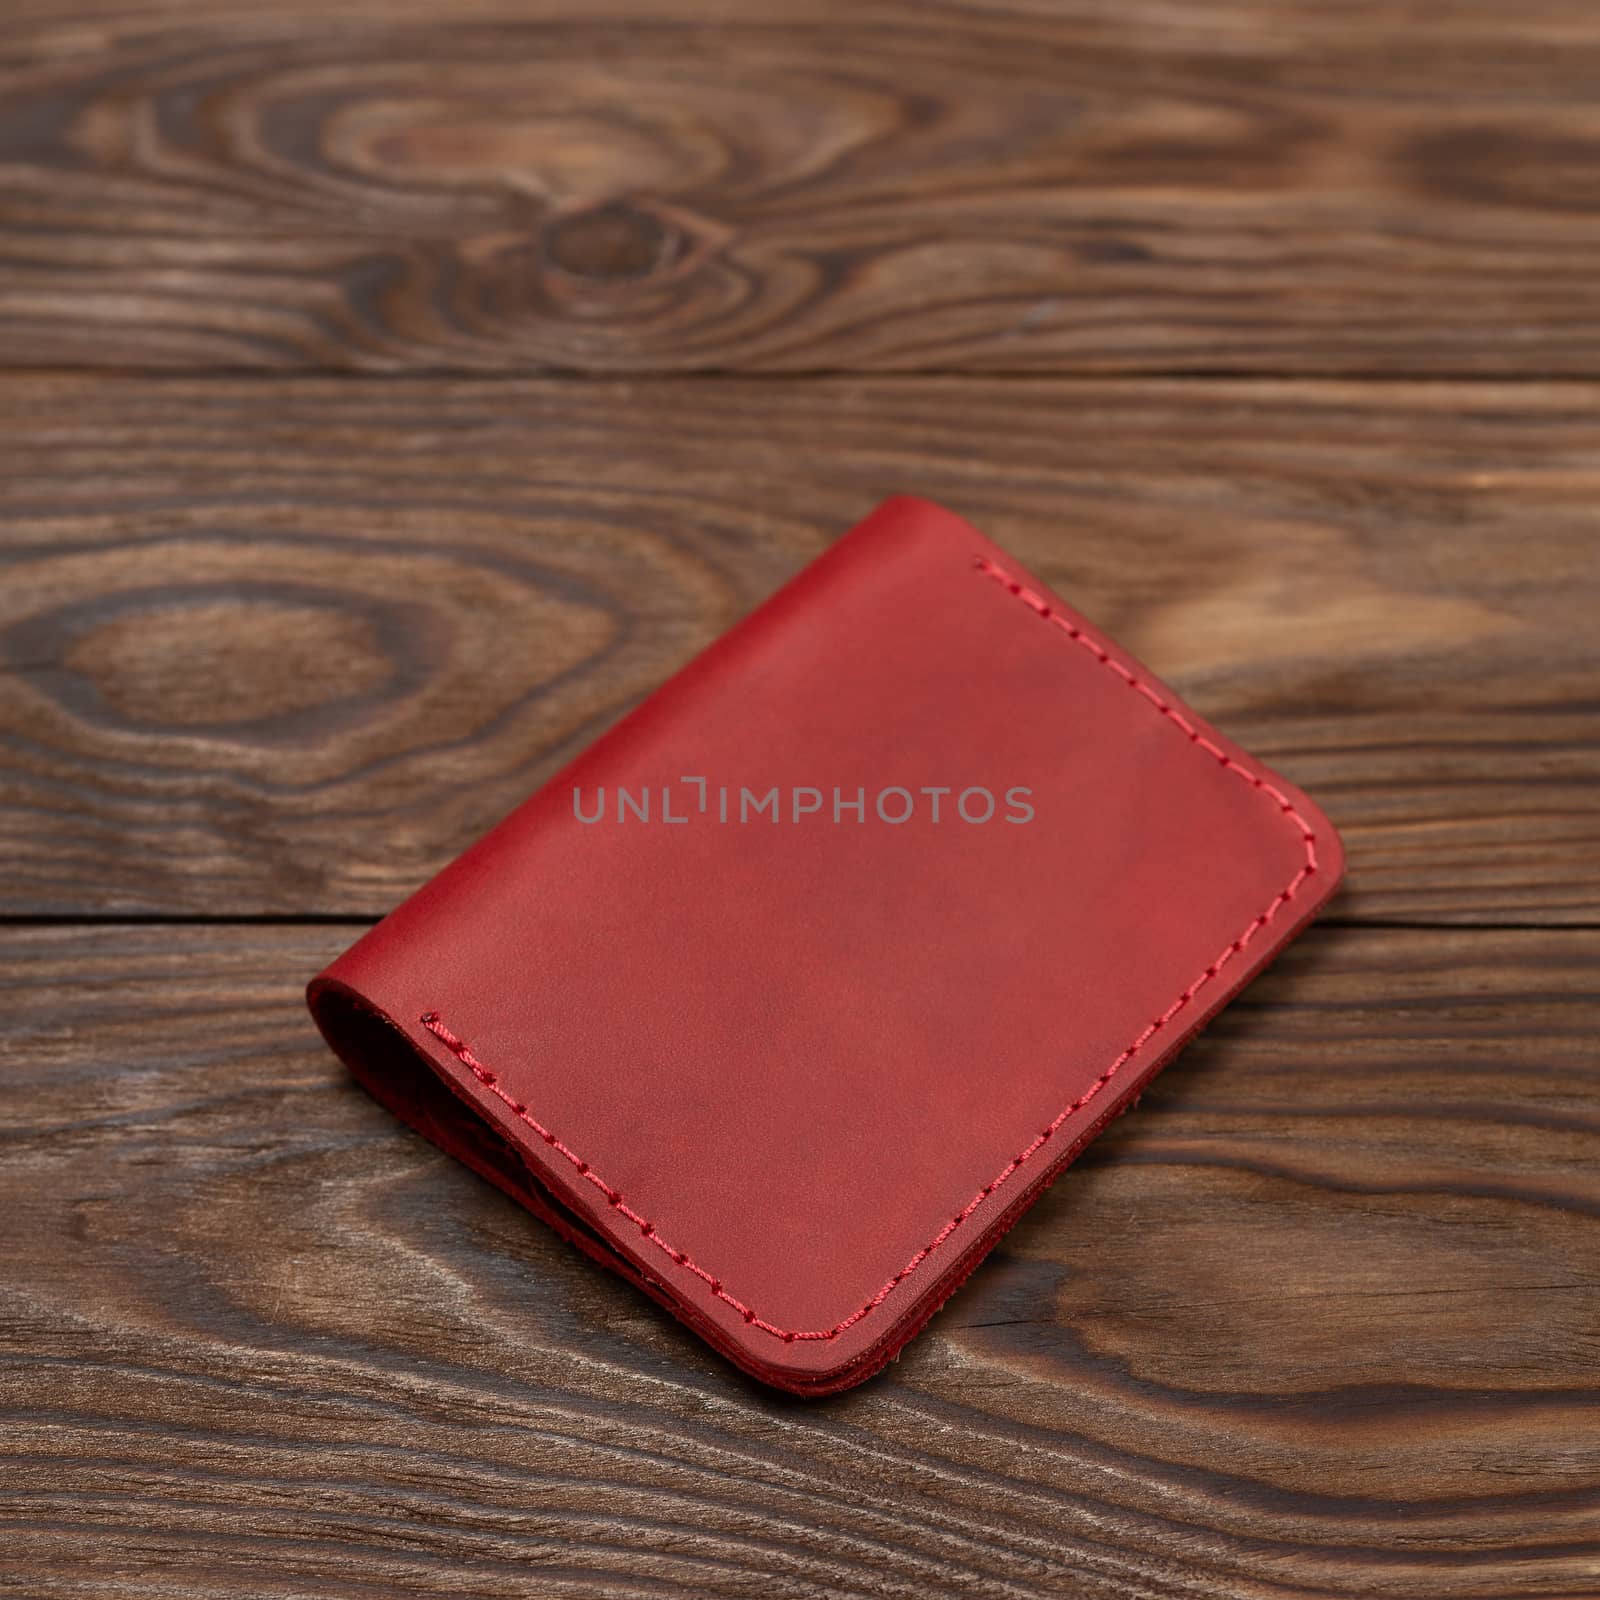 Red two-pocket closed leather handmade cardholder lies on wooden background. Soft focus on background. Stock photo on blurred background. by alexsdriver